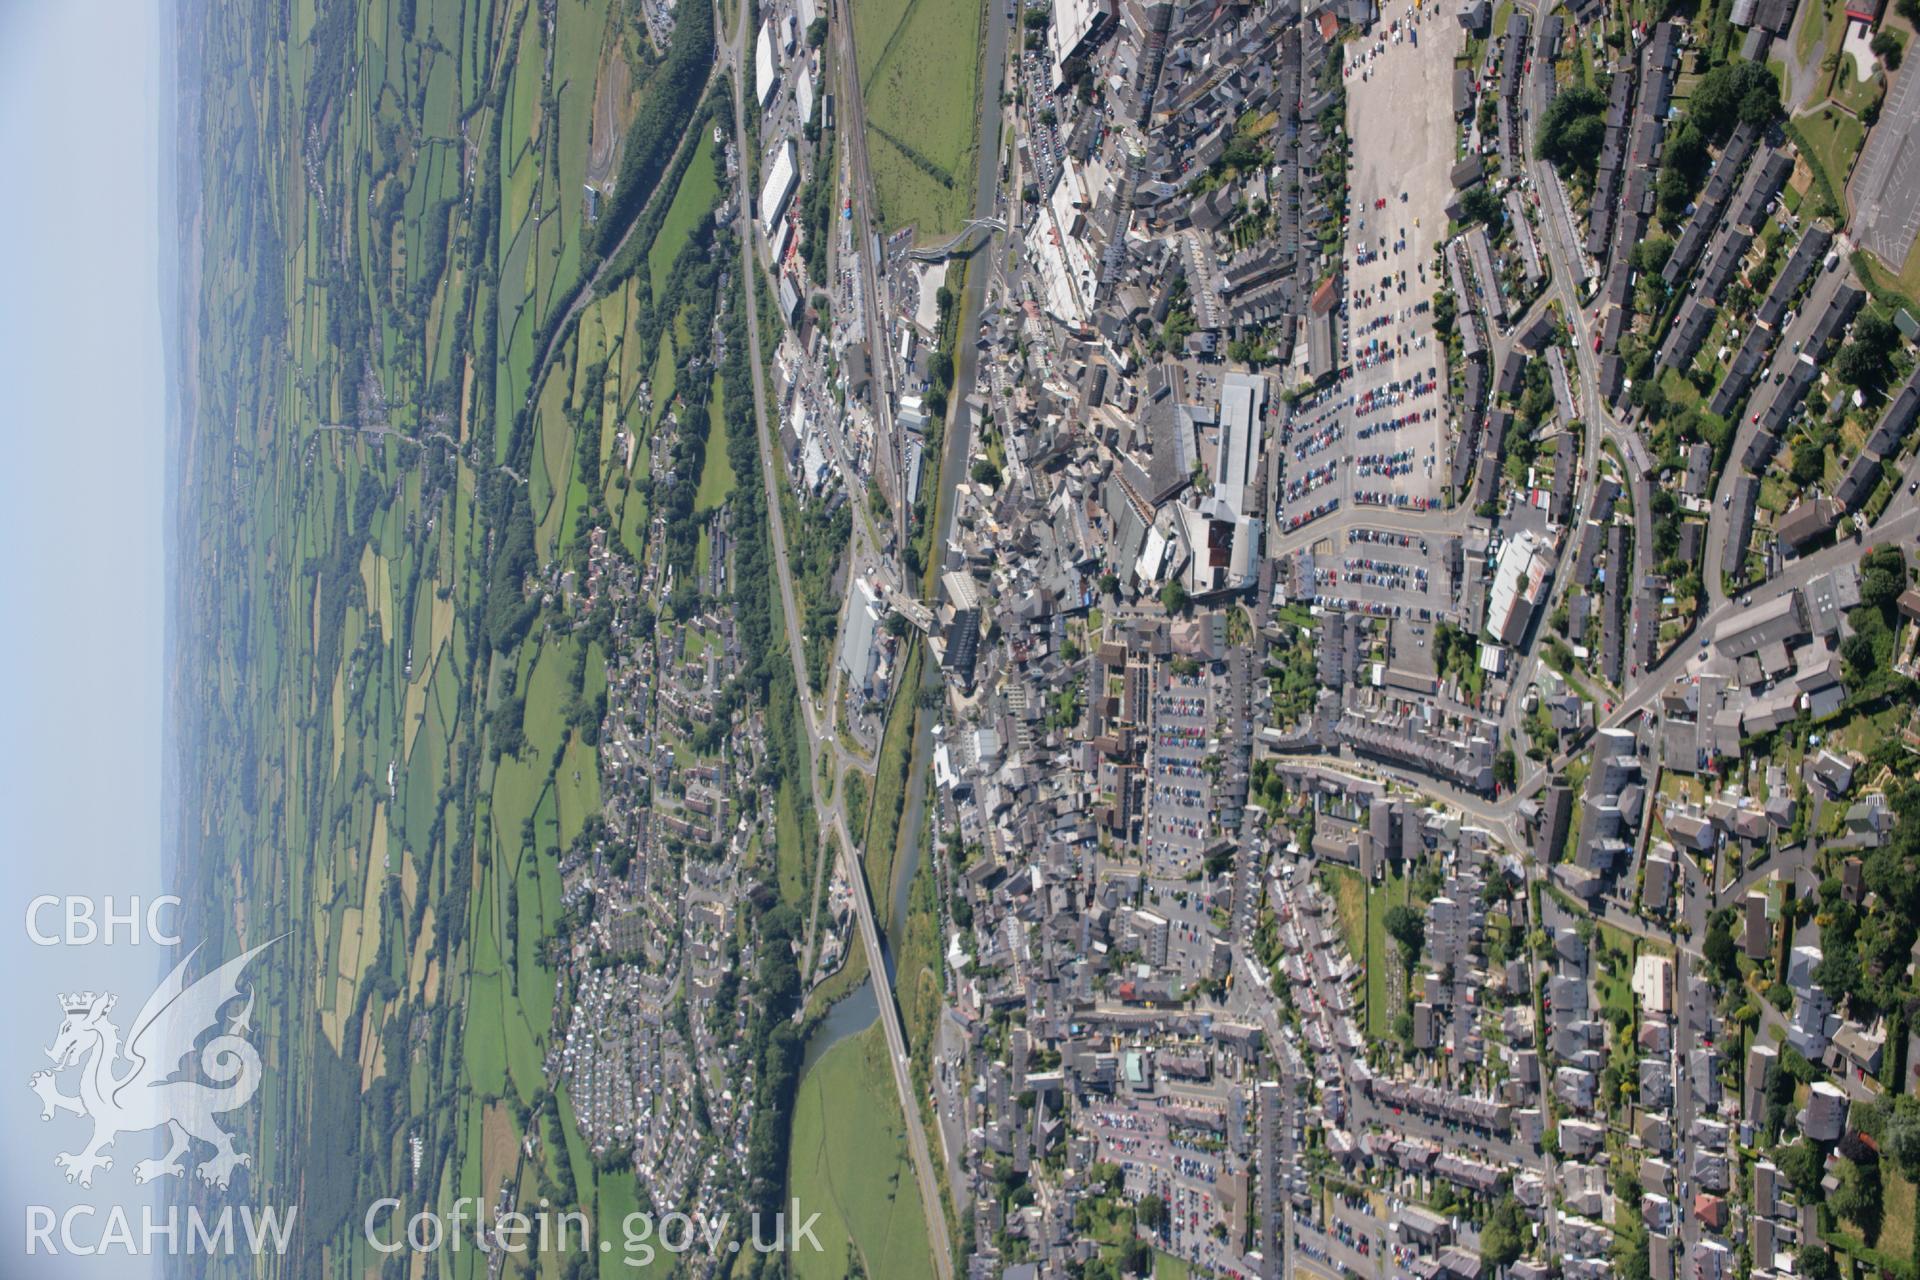 RCAHMW colour oblique aerial photograph of Carmarthen. Taken on 24 July 2006 by Toby Driver.